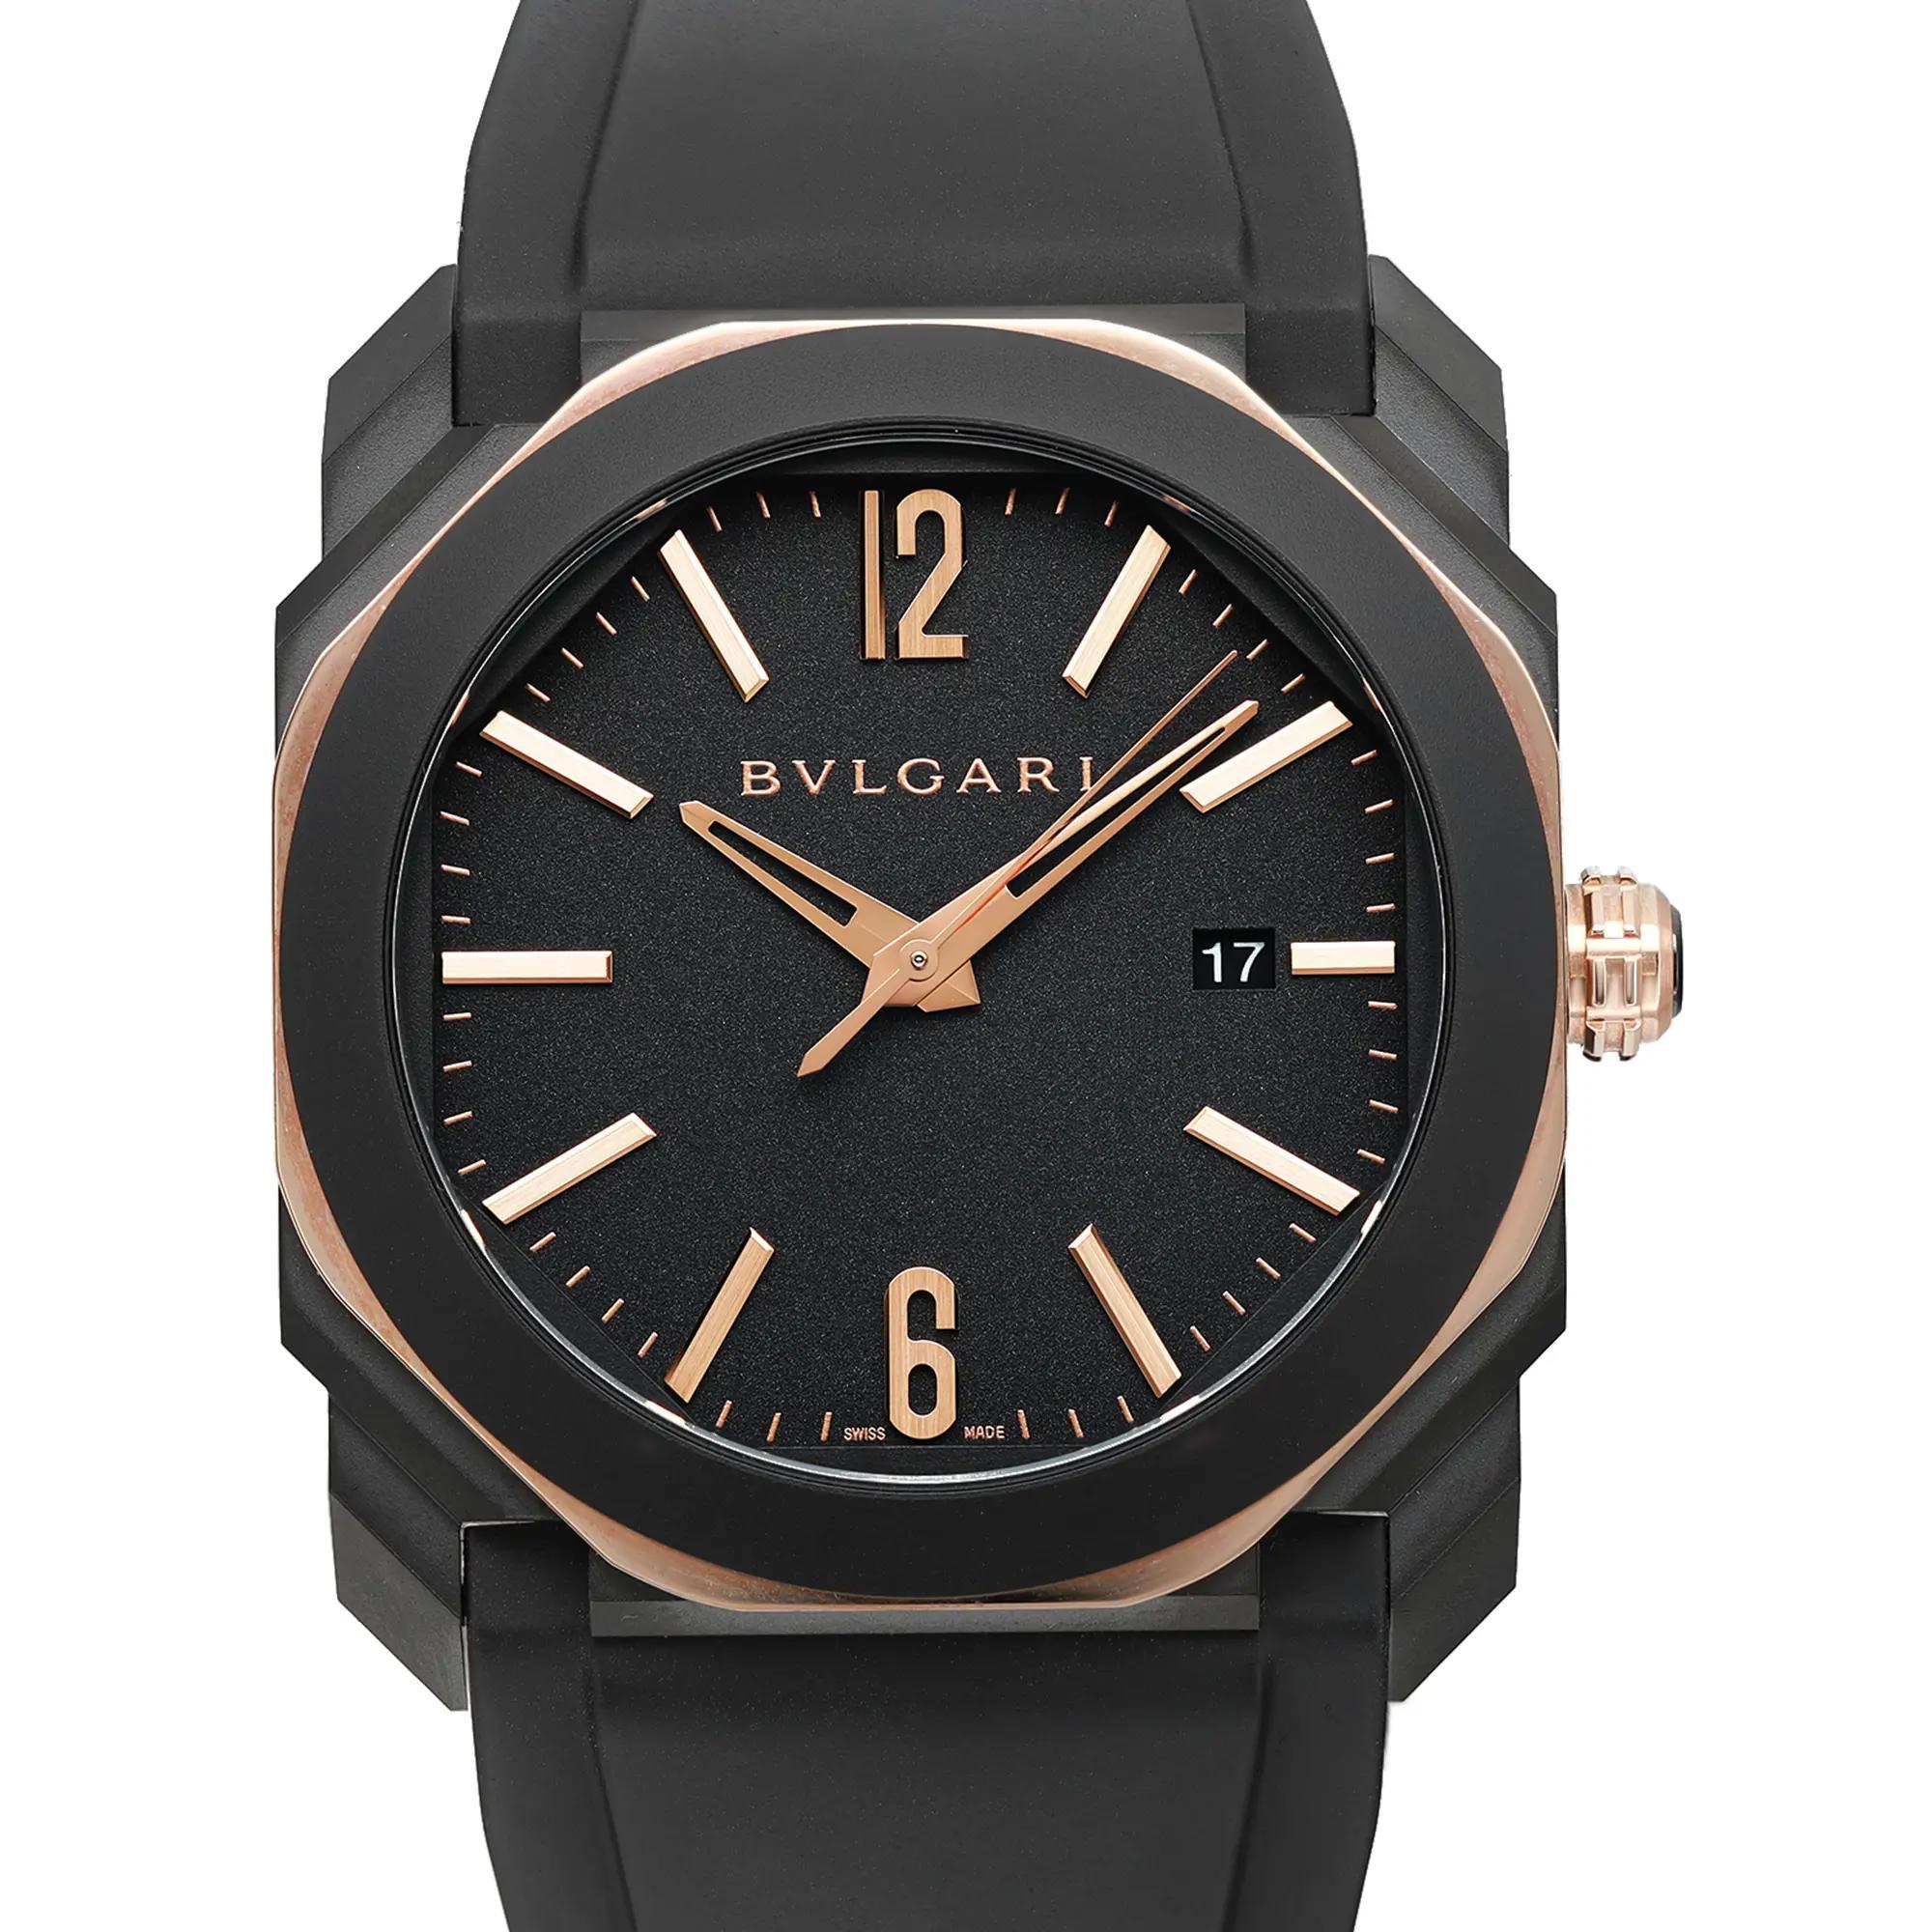 Display model. Comes with an original box and papers.

Brand and Model Information:
Brand: Bvlgari
Model: Bvlgari Octo L'Originale
Model Number: 103085

Type, Style, and Manufacturing:
Type: Wristwatch
Style: Luxury
Department: Men
Country/Region of